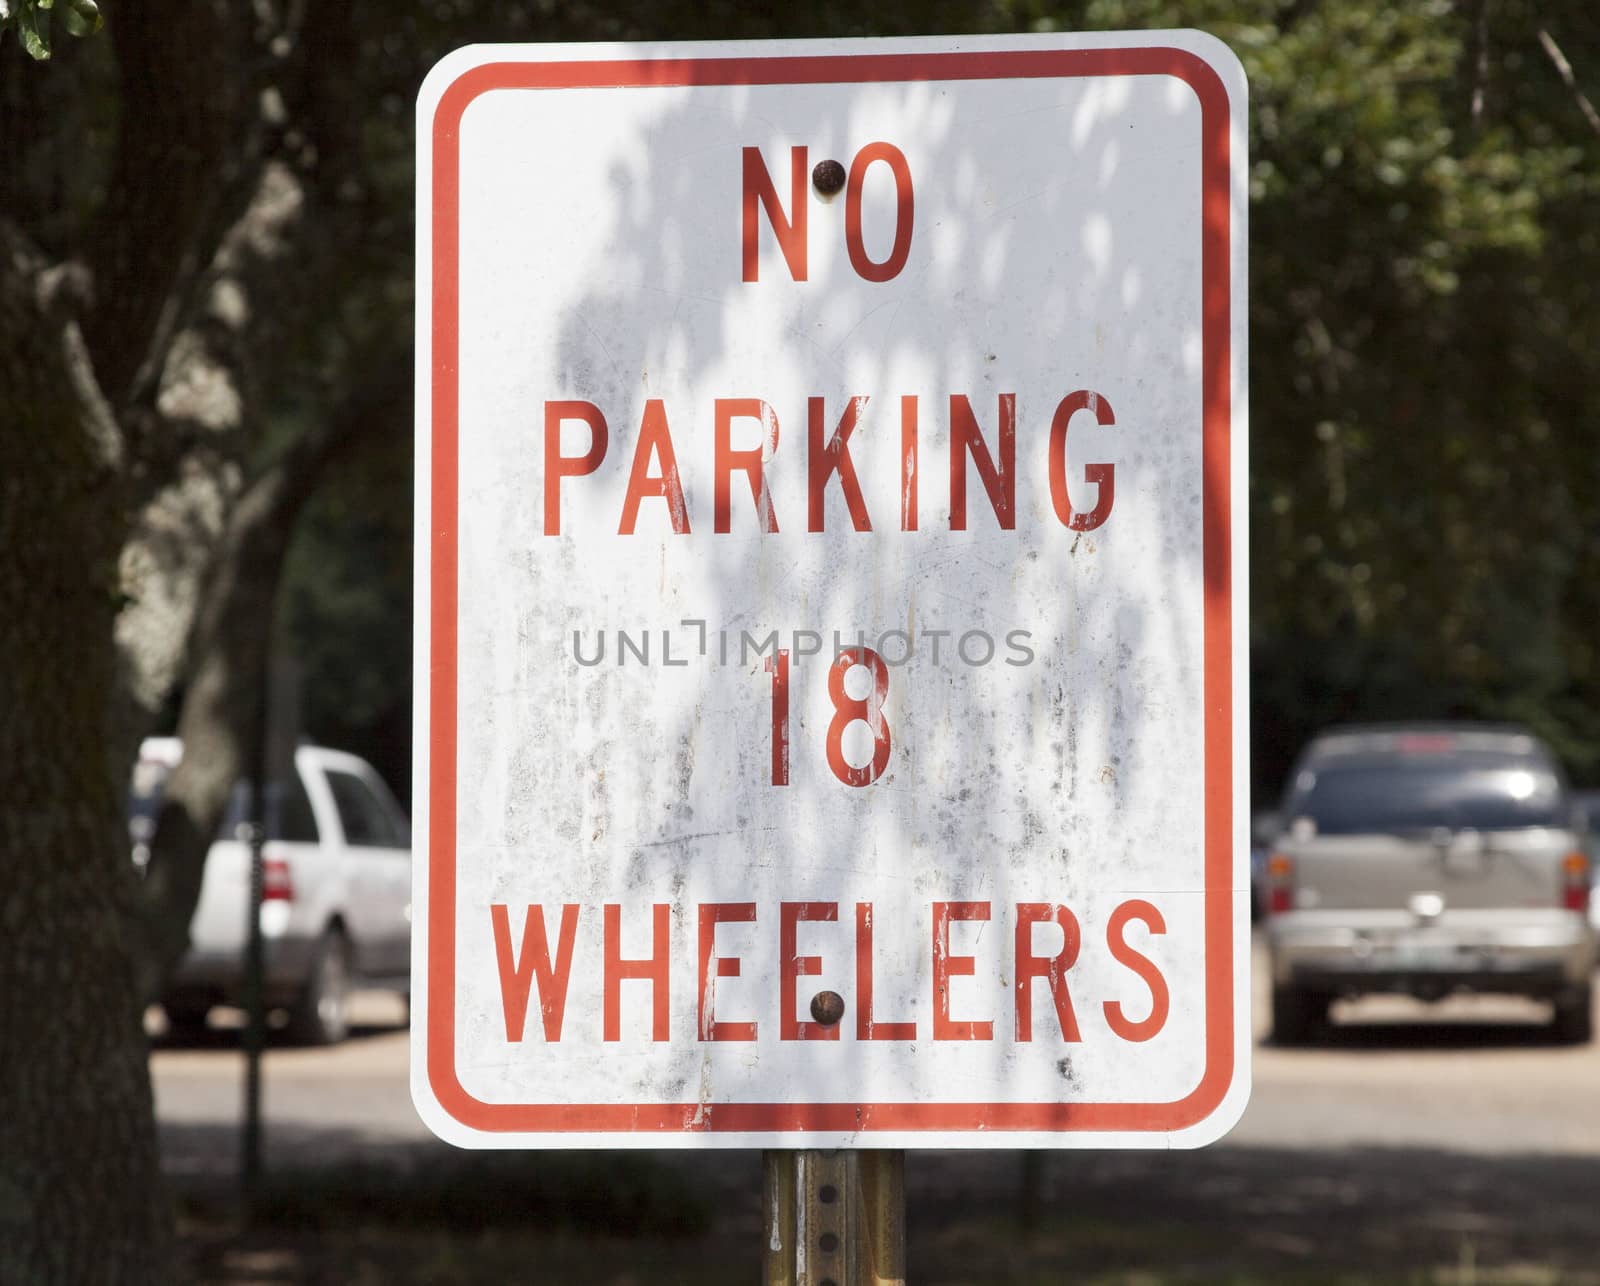 No parking 18 wheelers sign in shade